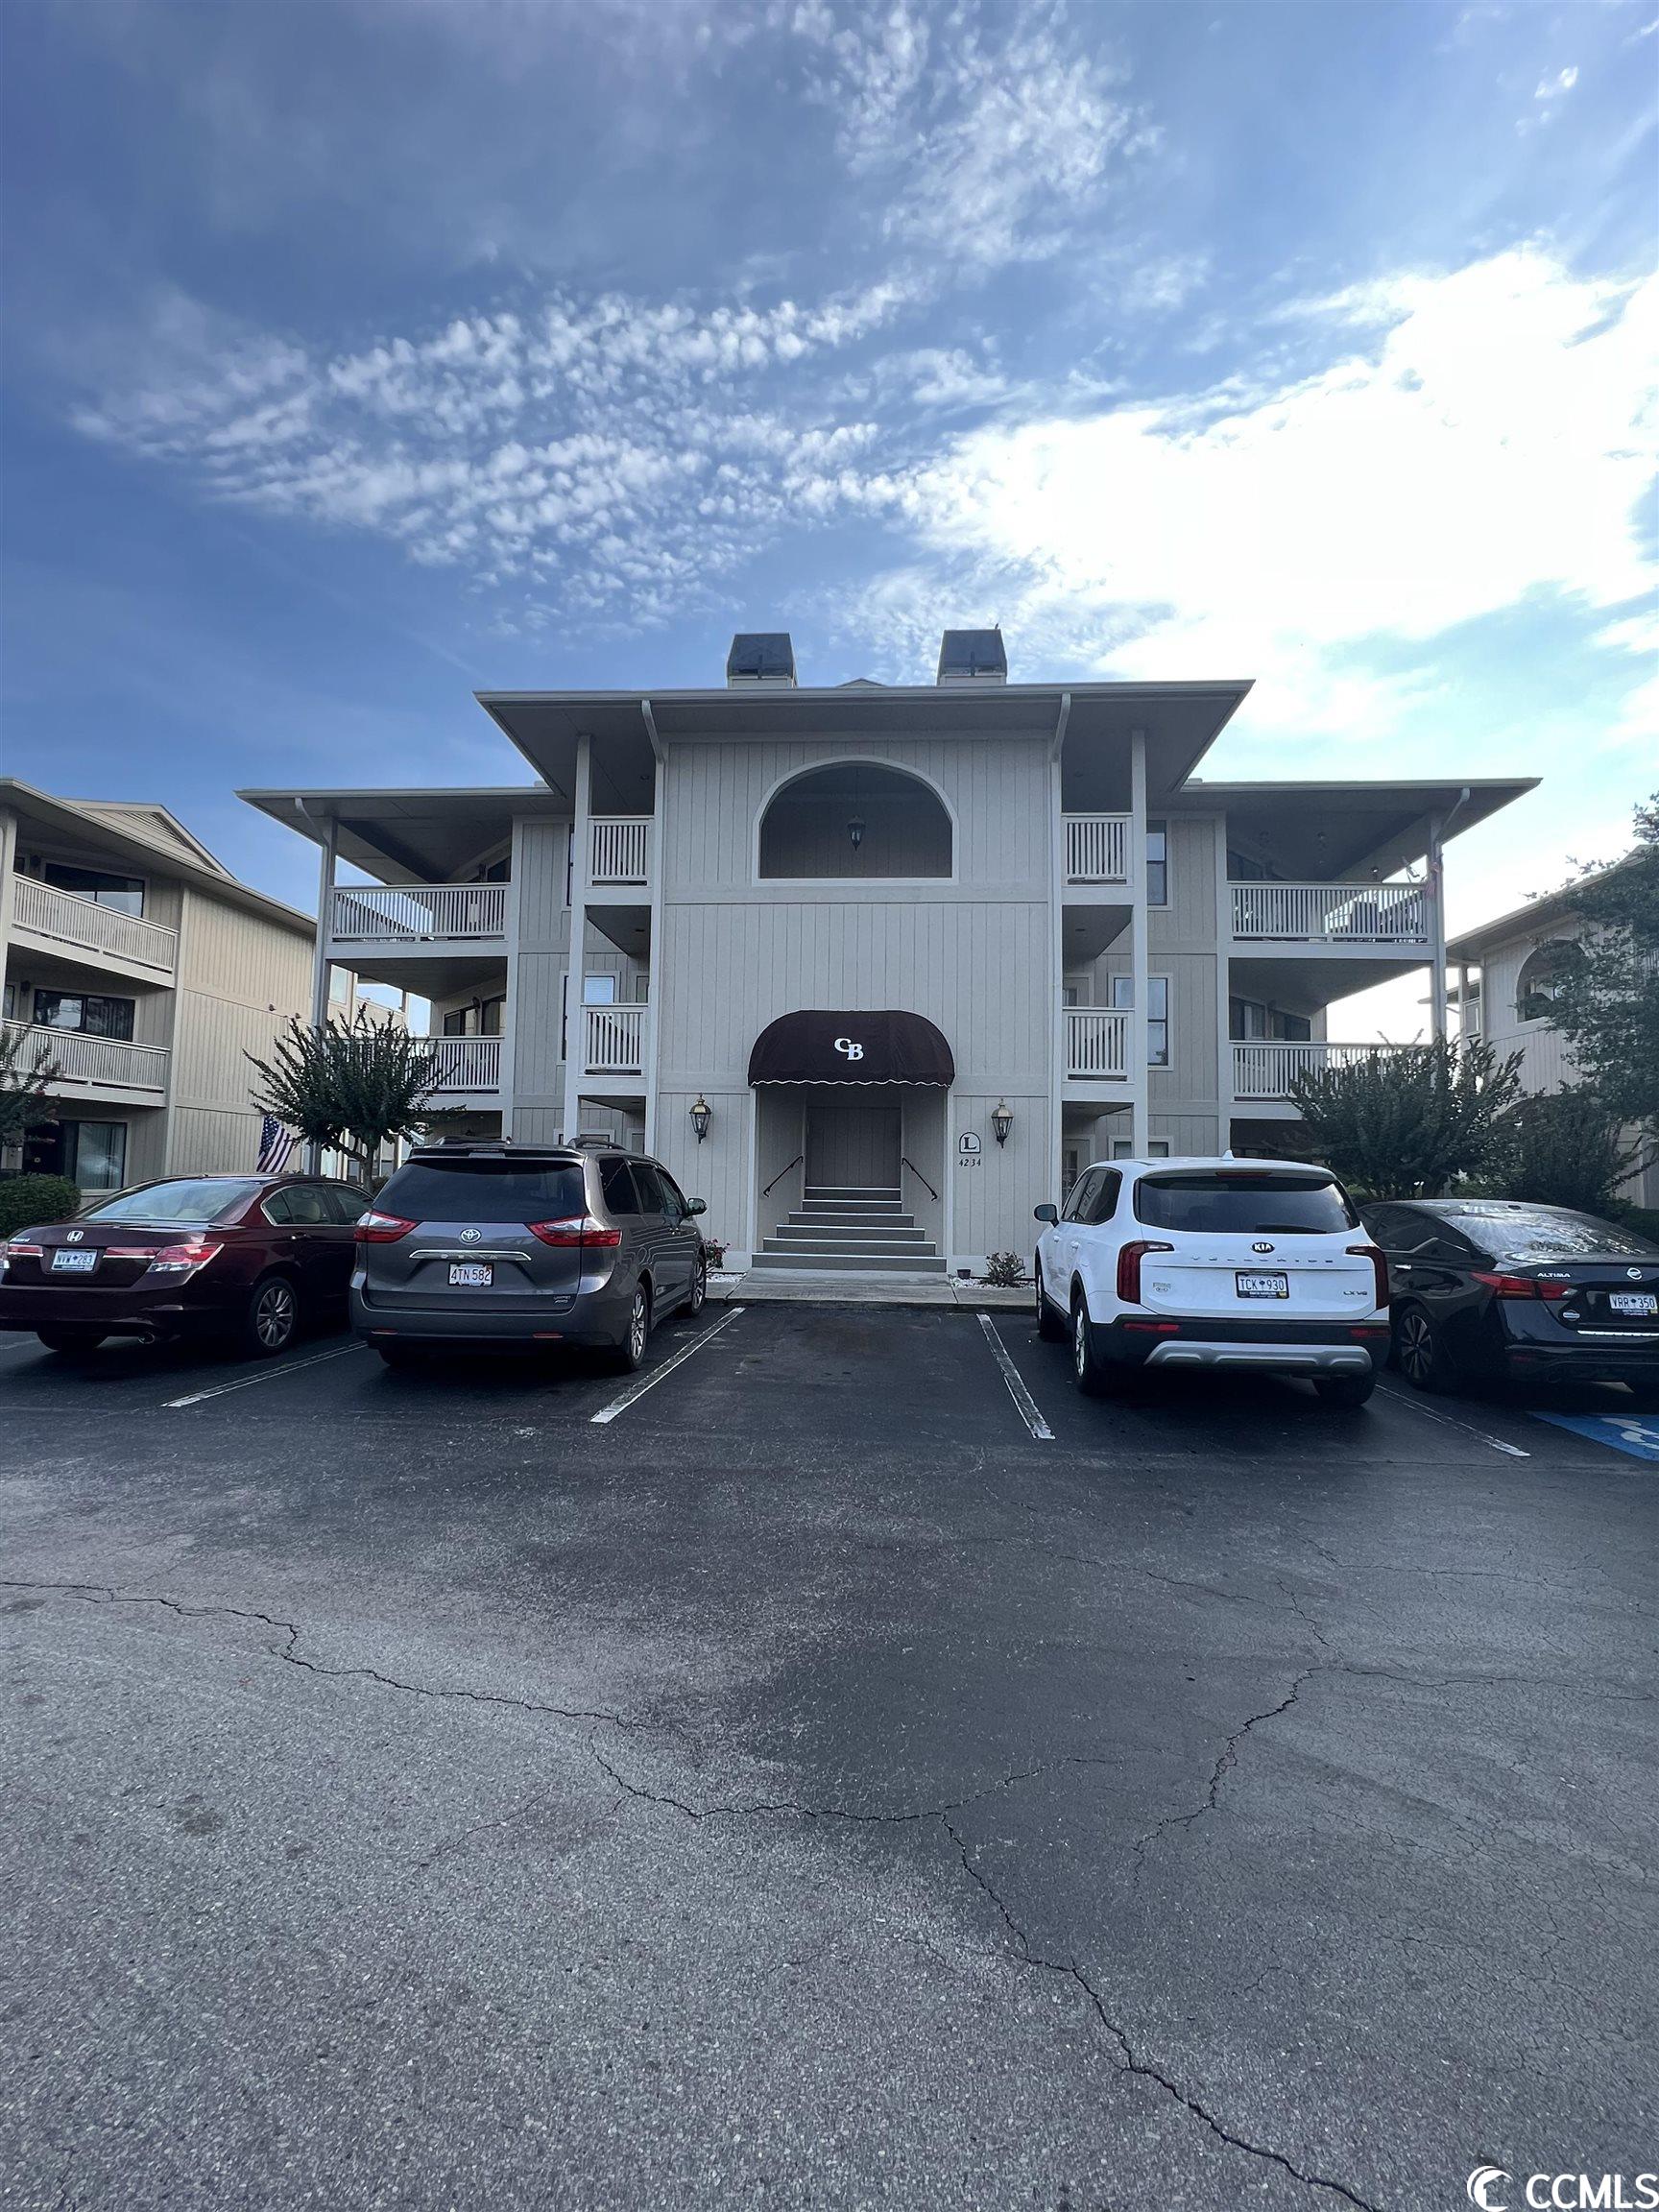 check out this 2 bedroom 2 bath condo at cypress bay. master bedroom freshly painted, carpets cleaned. two storage closets on the outside for all of your storage needs. close to the pool. close to restaurants, food lion, cvs and close to the beaches, marinas and public boat launches.